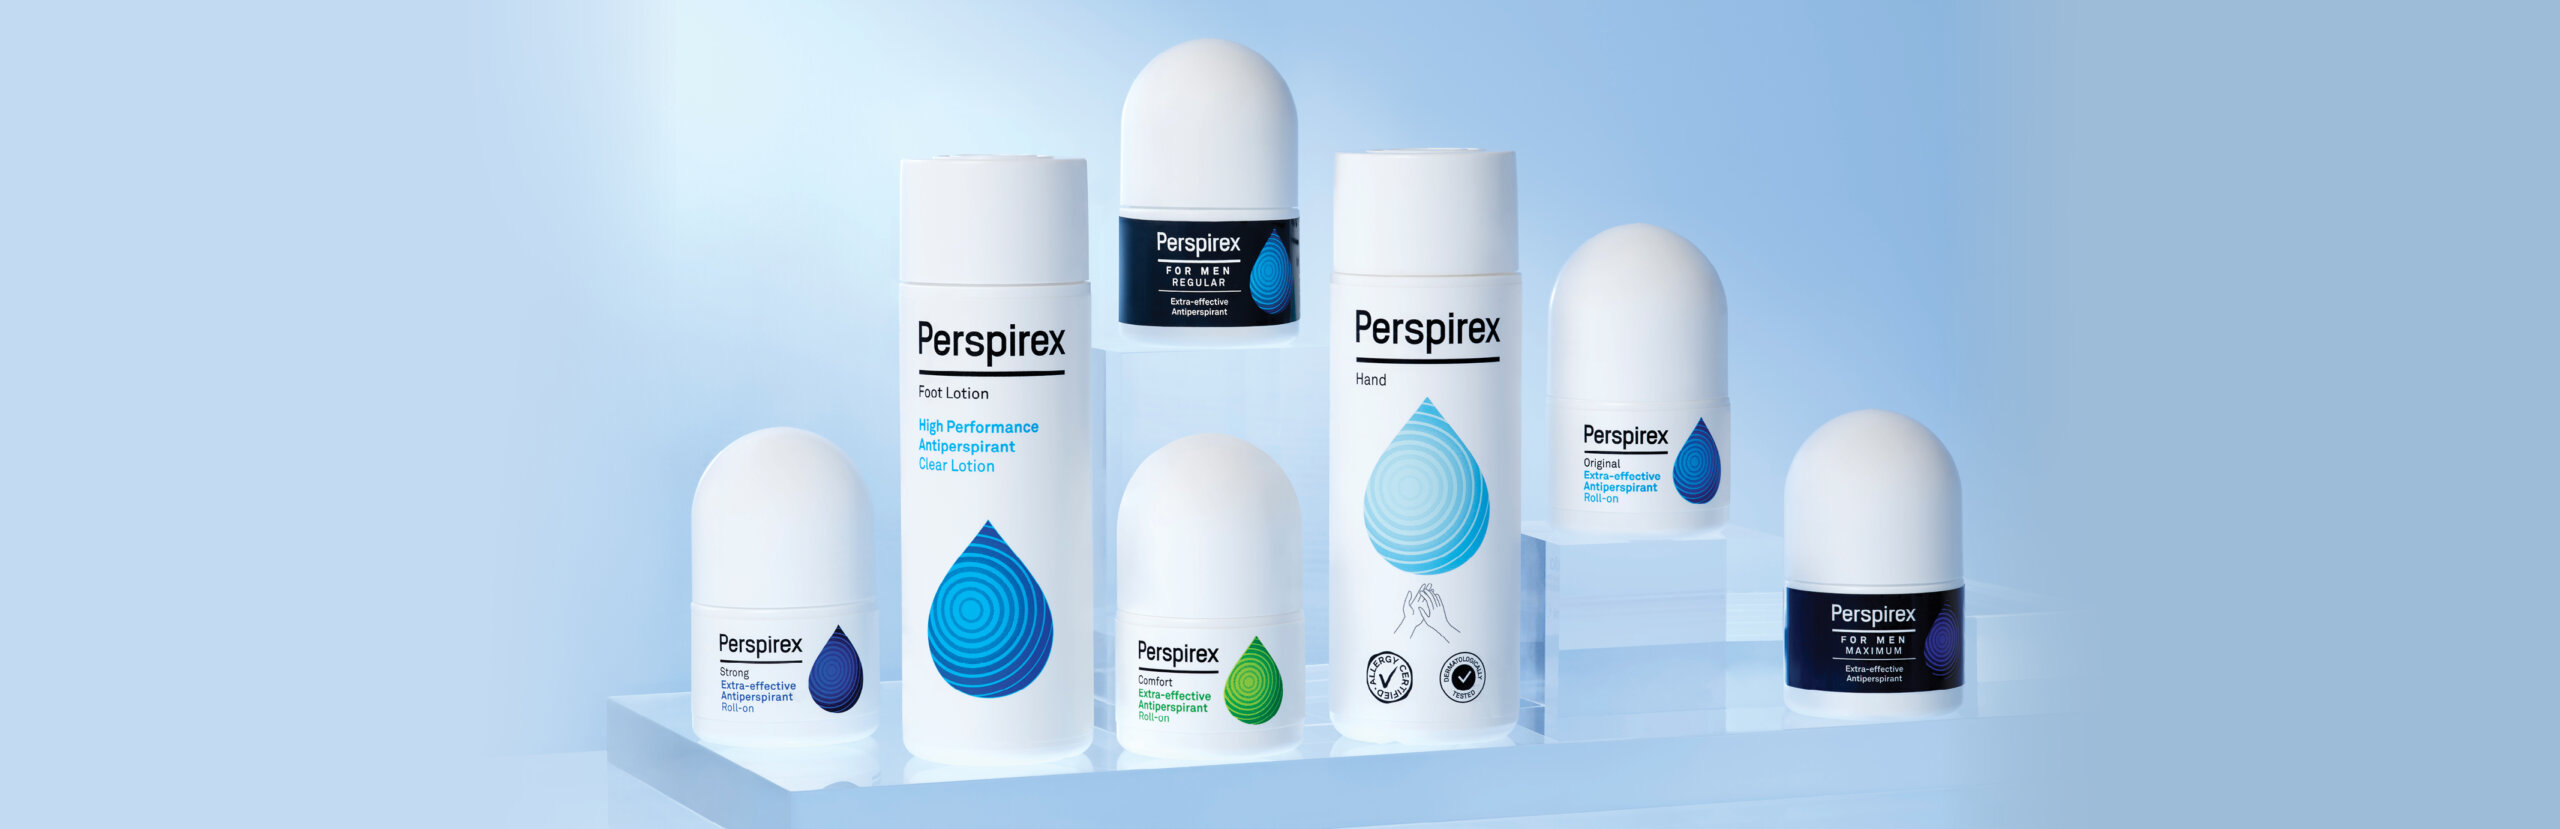 Perspirex products